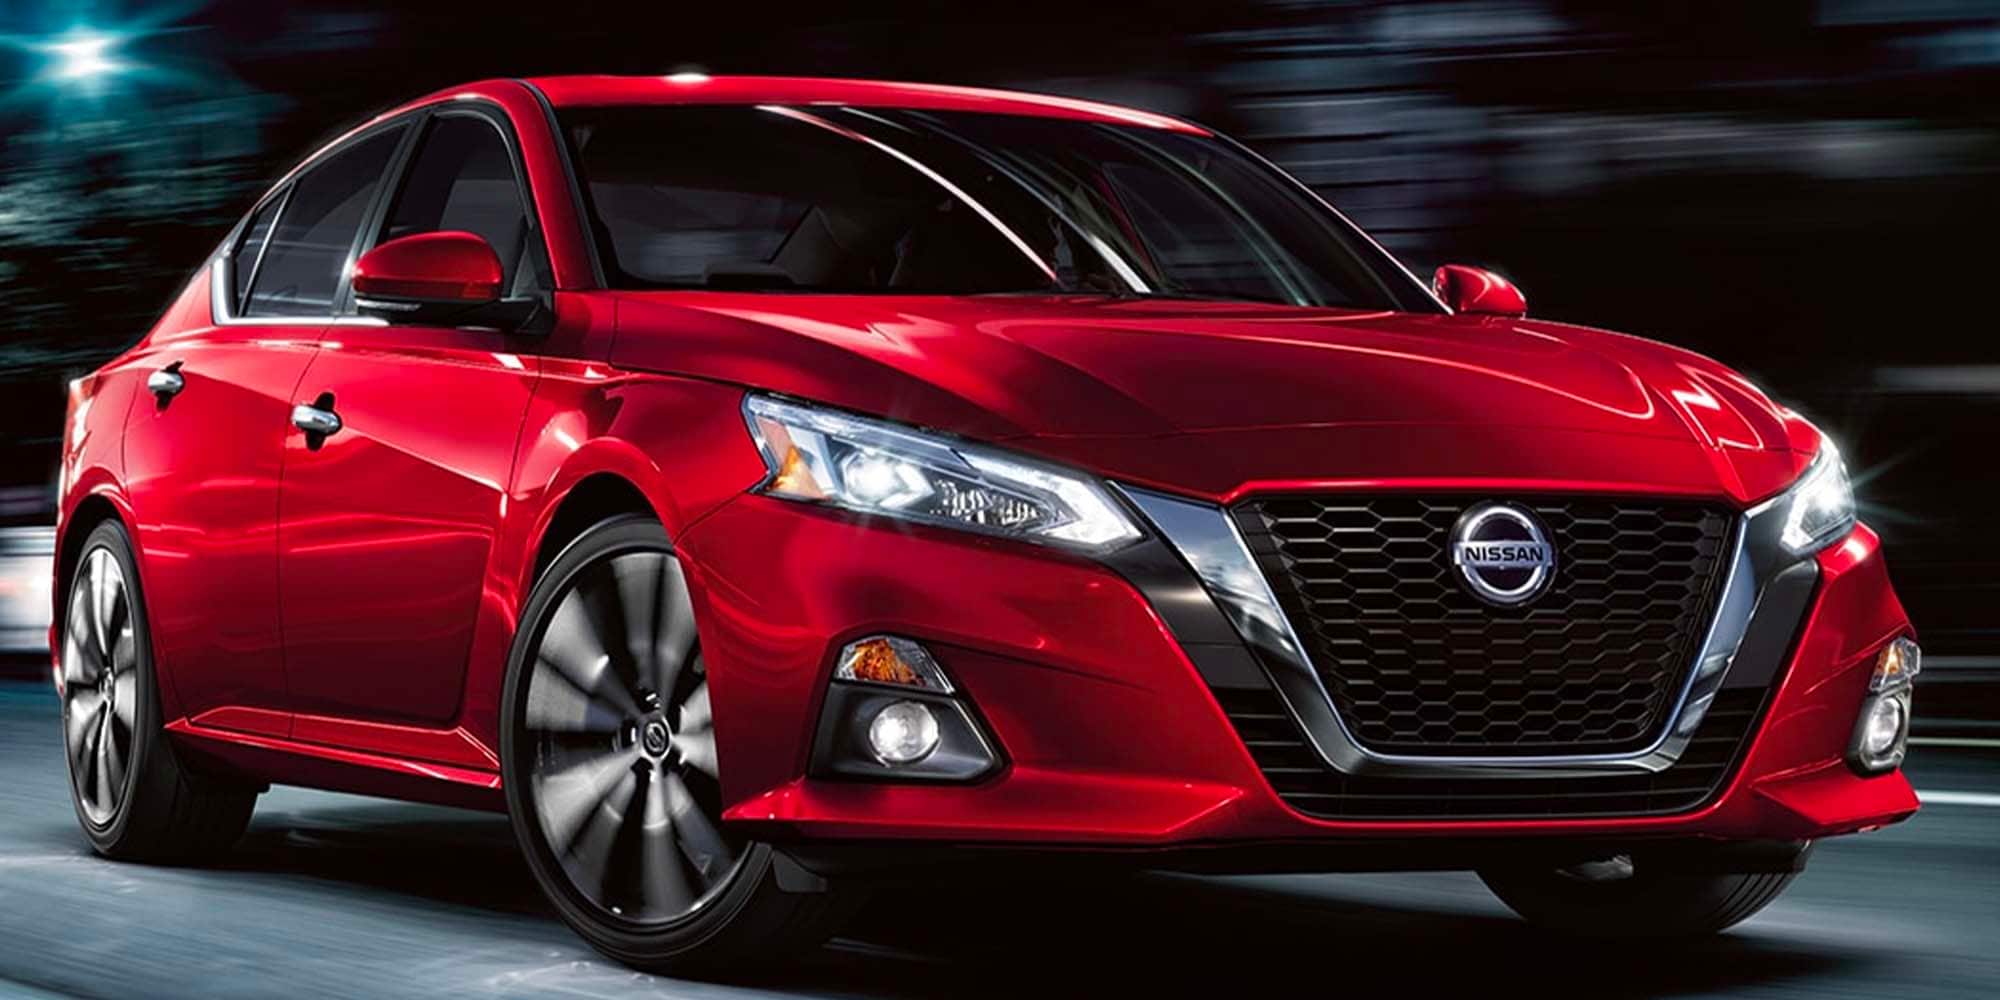 Nissan Altima Lease Offers, Deals & Specials Beaver Falls, PA